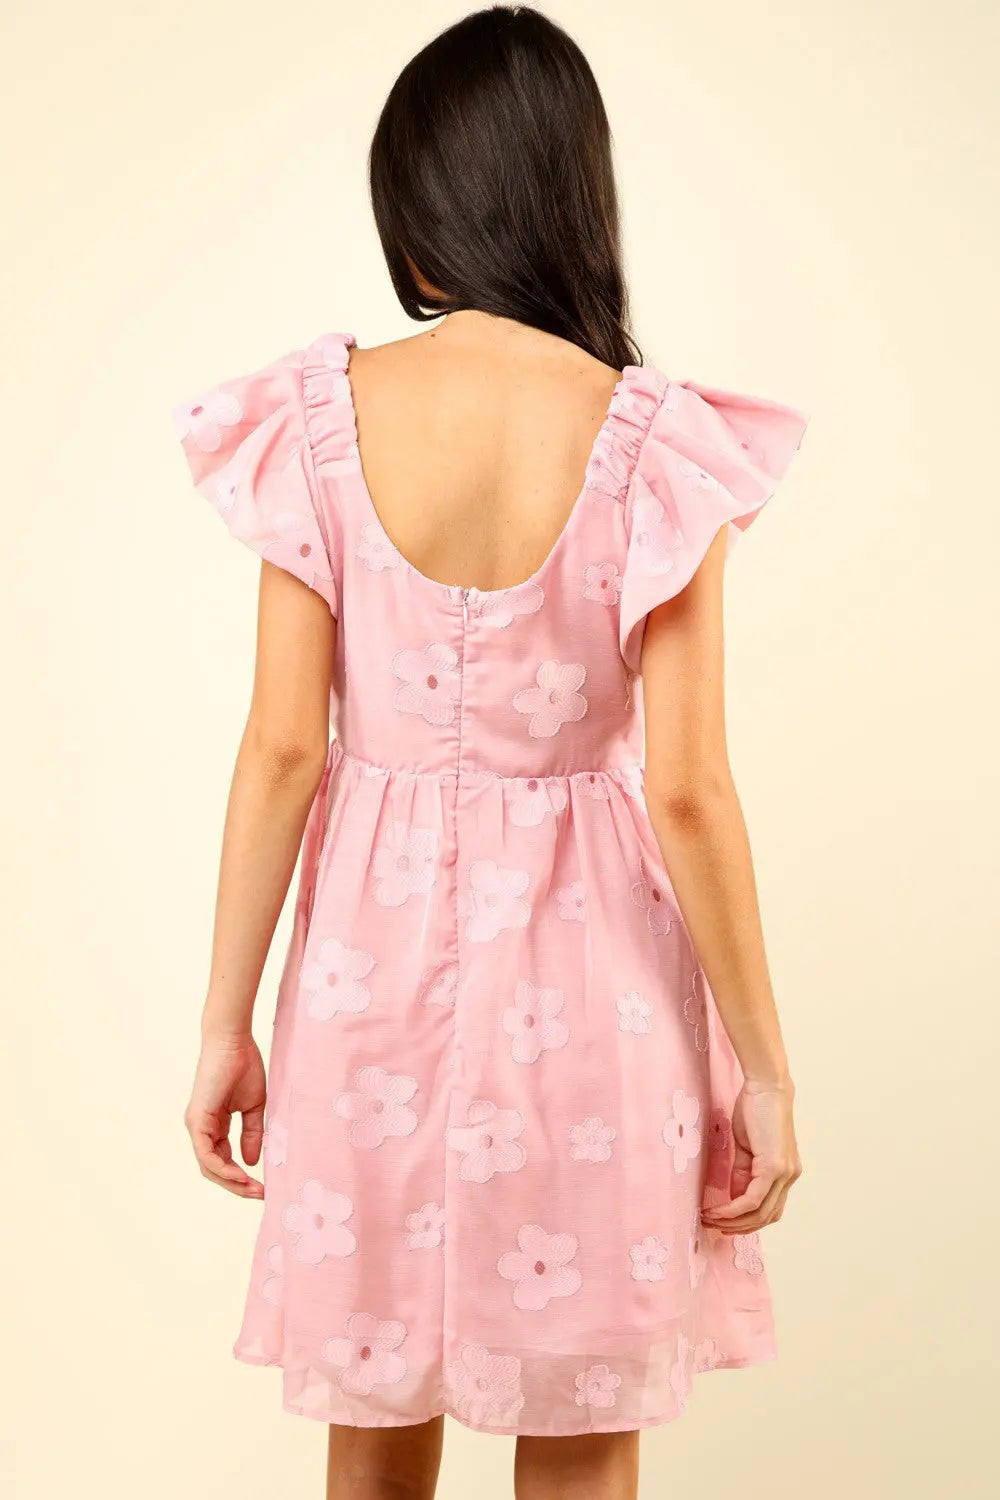 VERY J Flower Embroidered Organza Mini Dress  Hot Trends